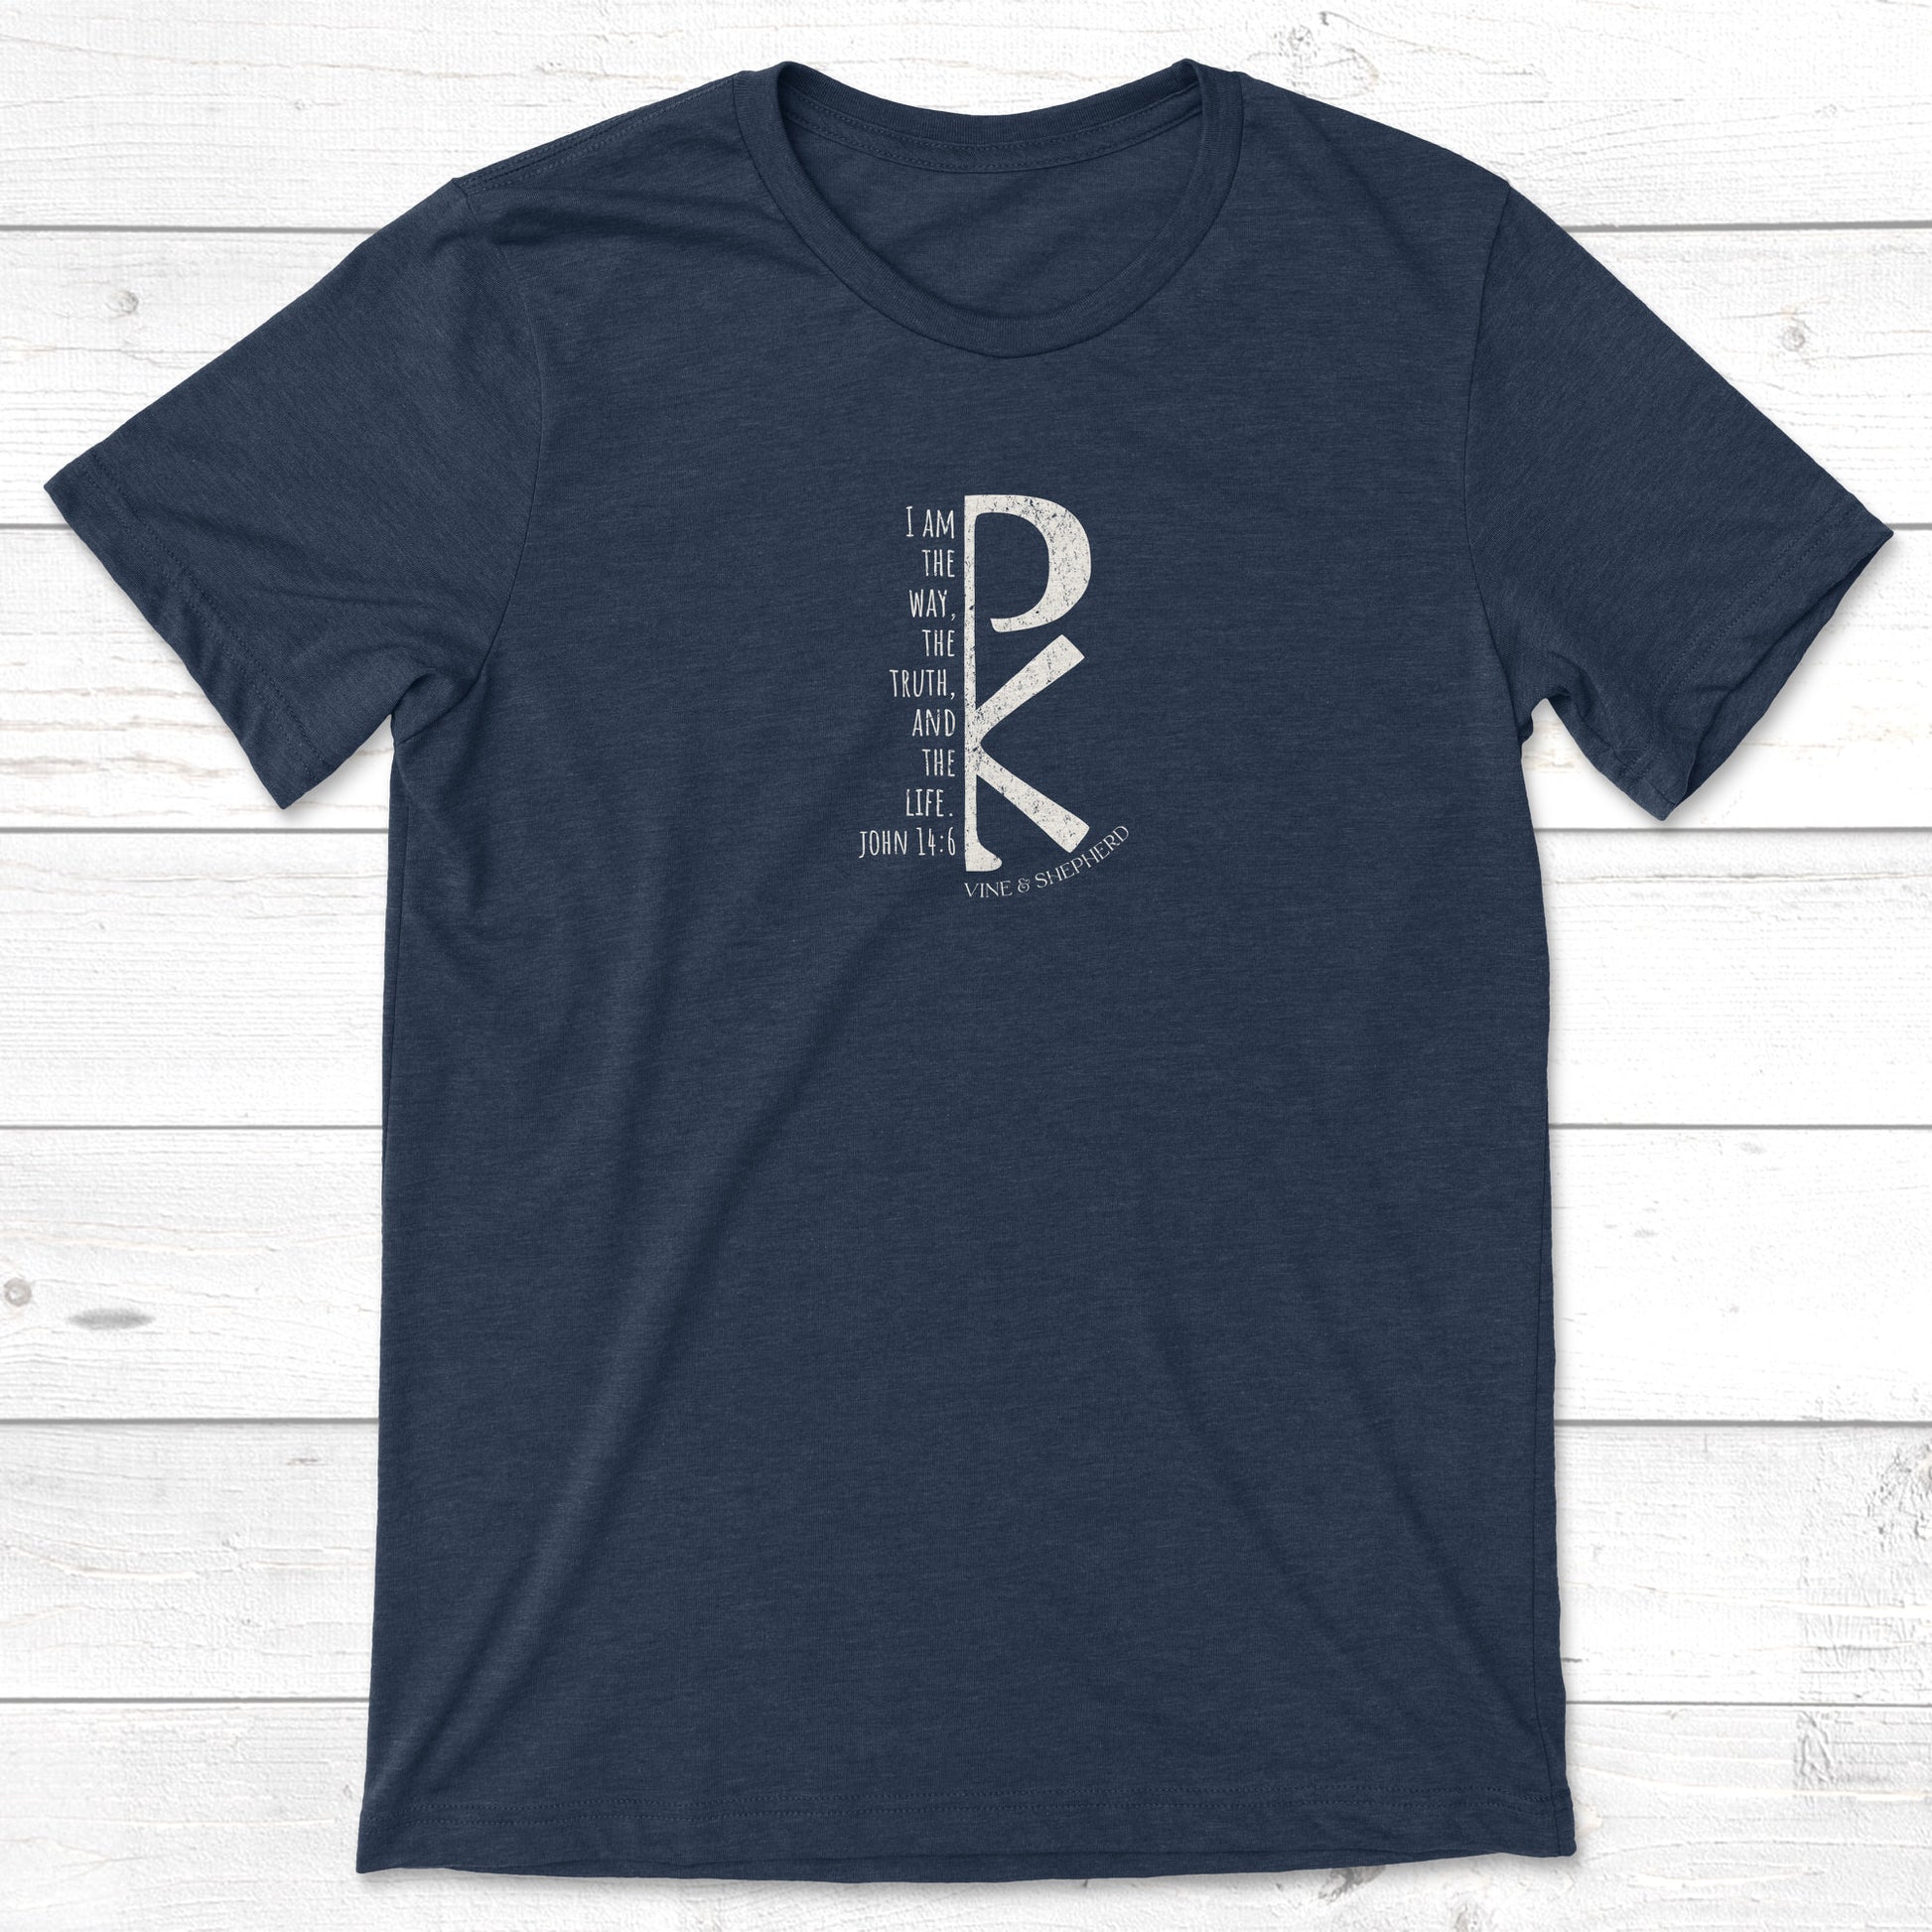 Way, Truth, and Life t-shirt in heather navy